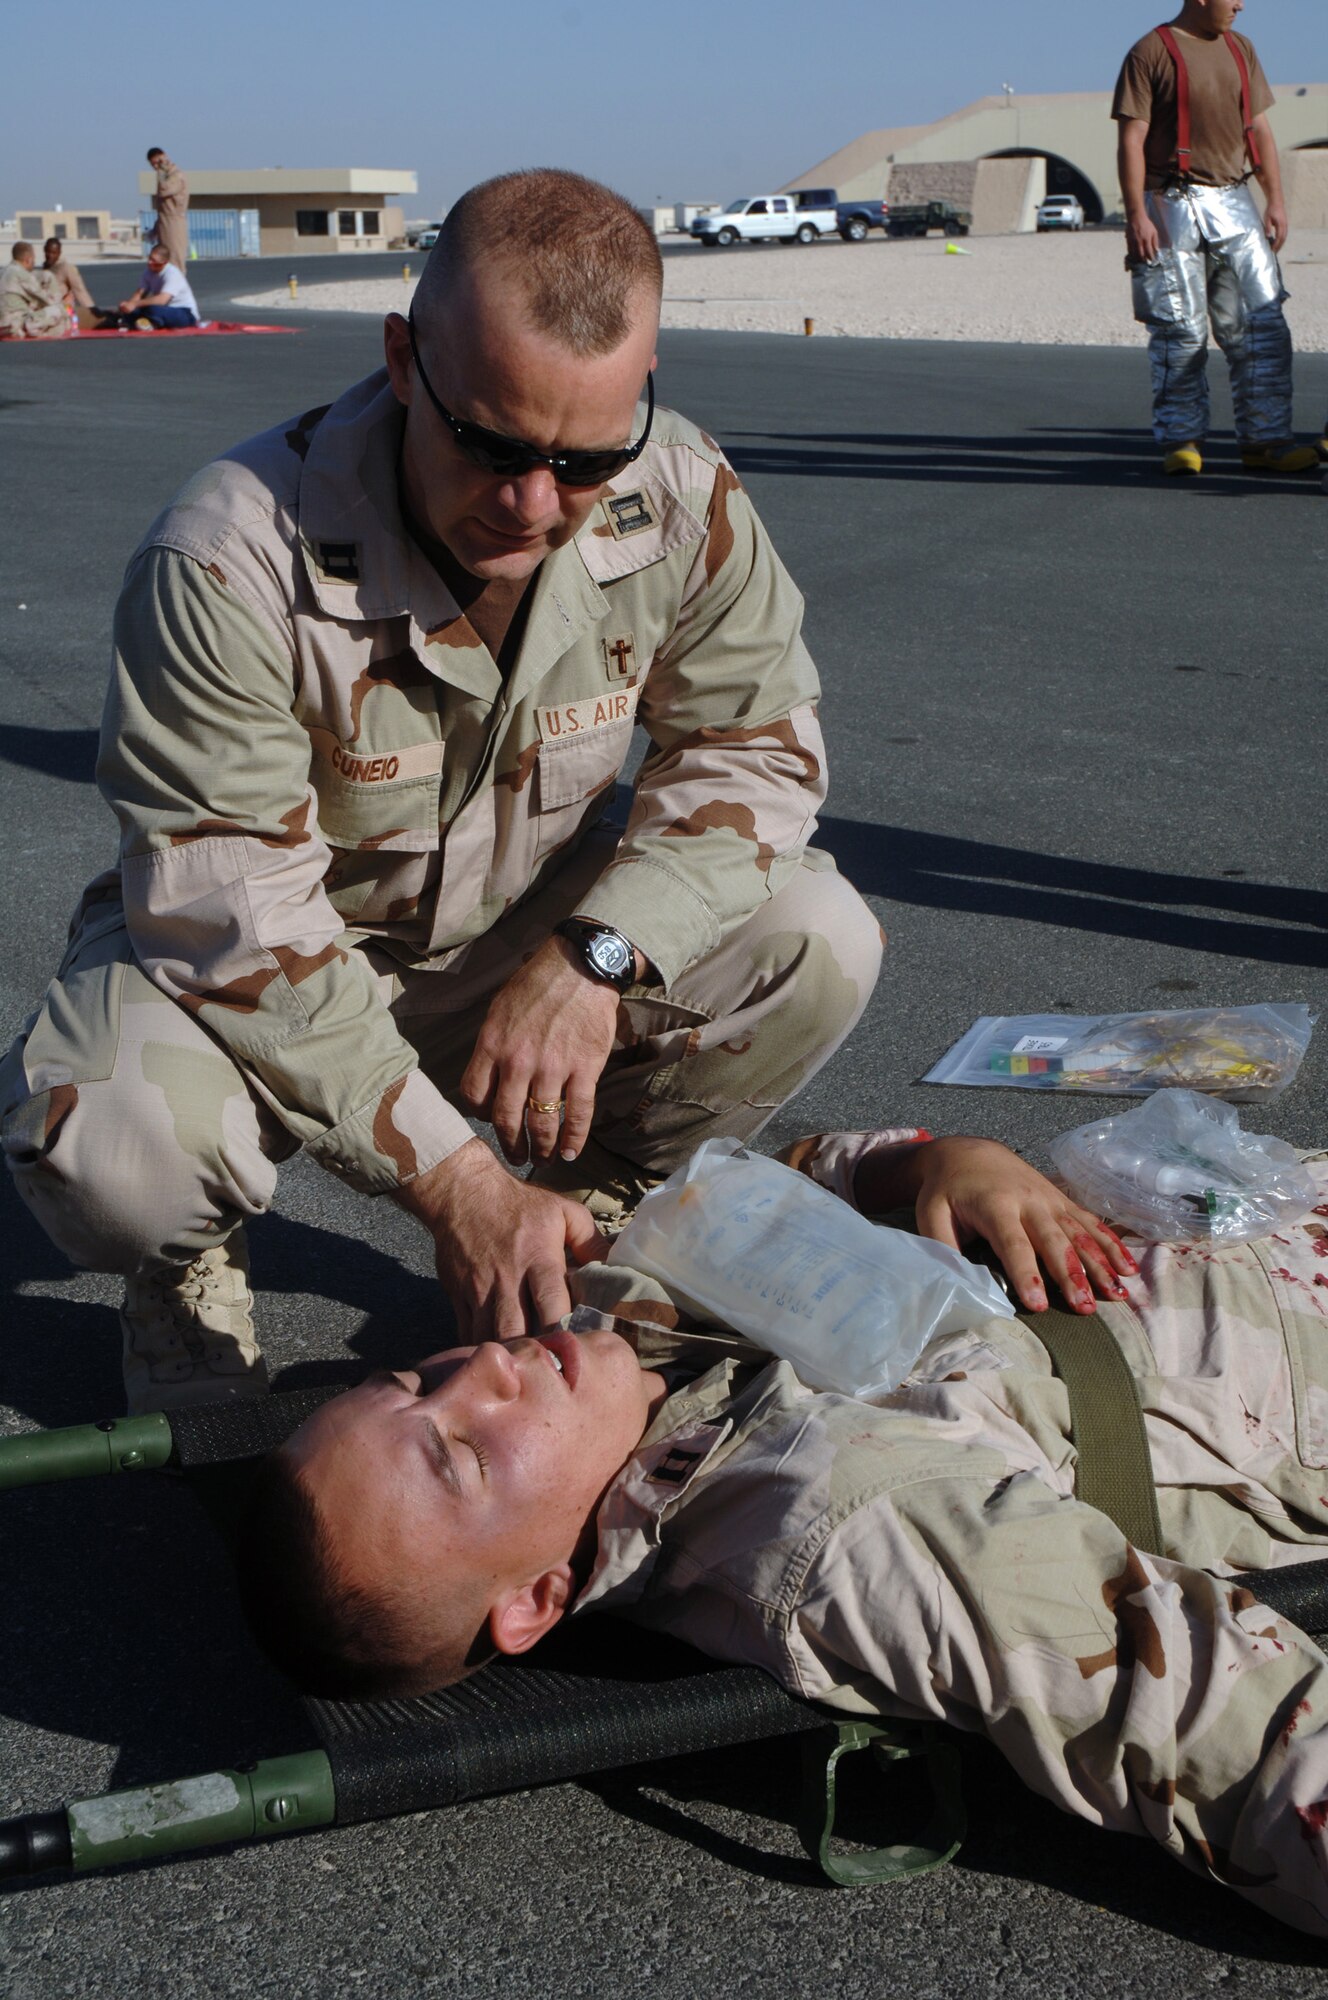 SOUTHWEST ASIA-  Chaplain (Capt.) Steven Cuneio, 379th Air Expeditionary Wing, comforts an Airman during a Major Accident Response Exercise Dec. 14 at a Southwest Asia air base. Chaplain Cuneio is deployed from Goodfellow AFB, Texas. (U.S. Air Force photo/Staff Sgt. Douglas Olsen)